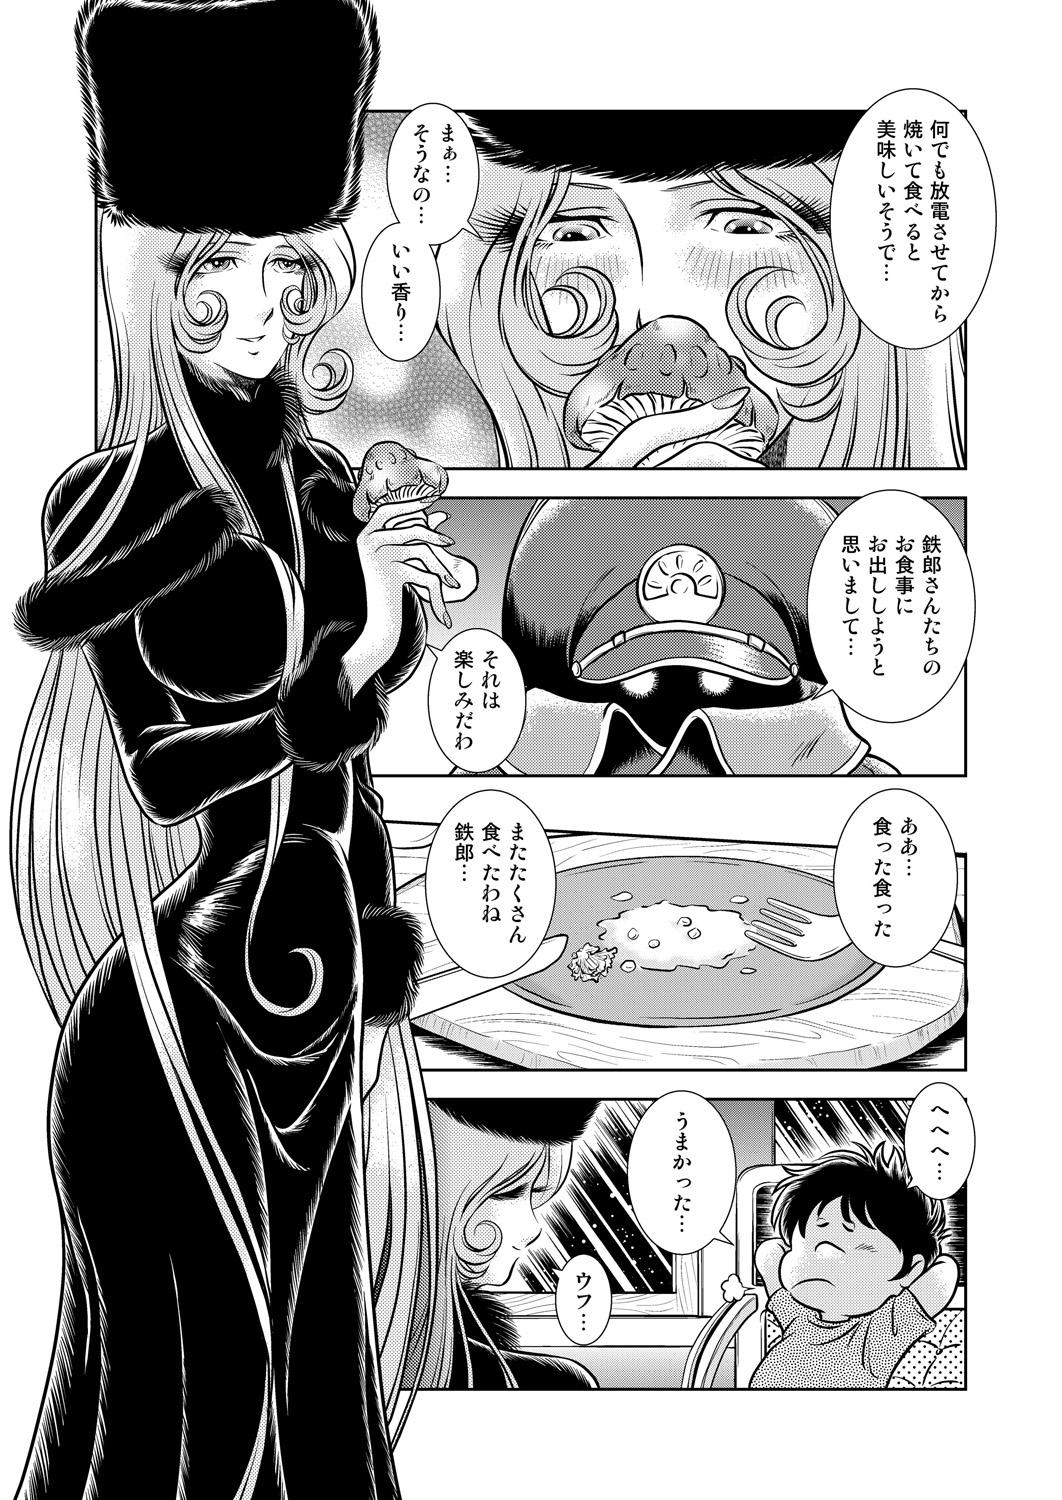 Hot Couple Sex Maetel Story 9 - Galaxy express 999 Adult - Page 7